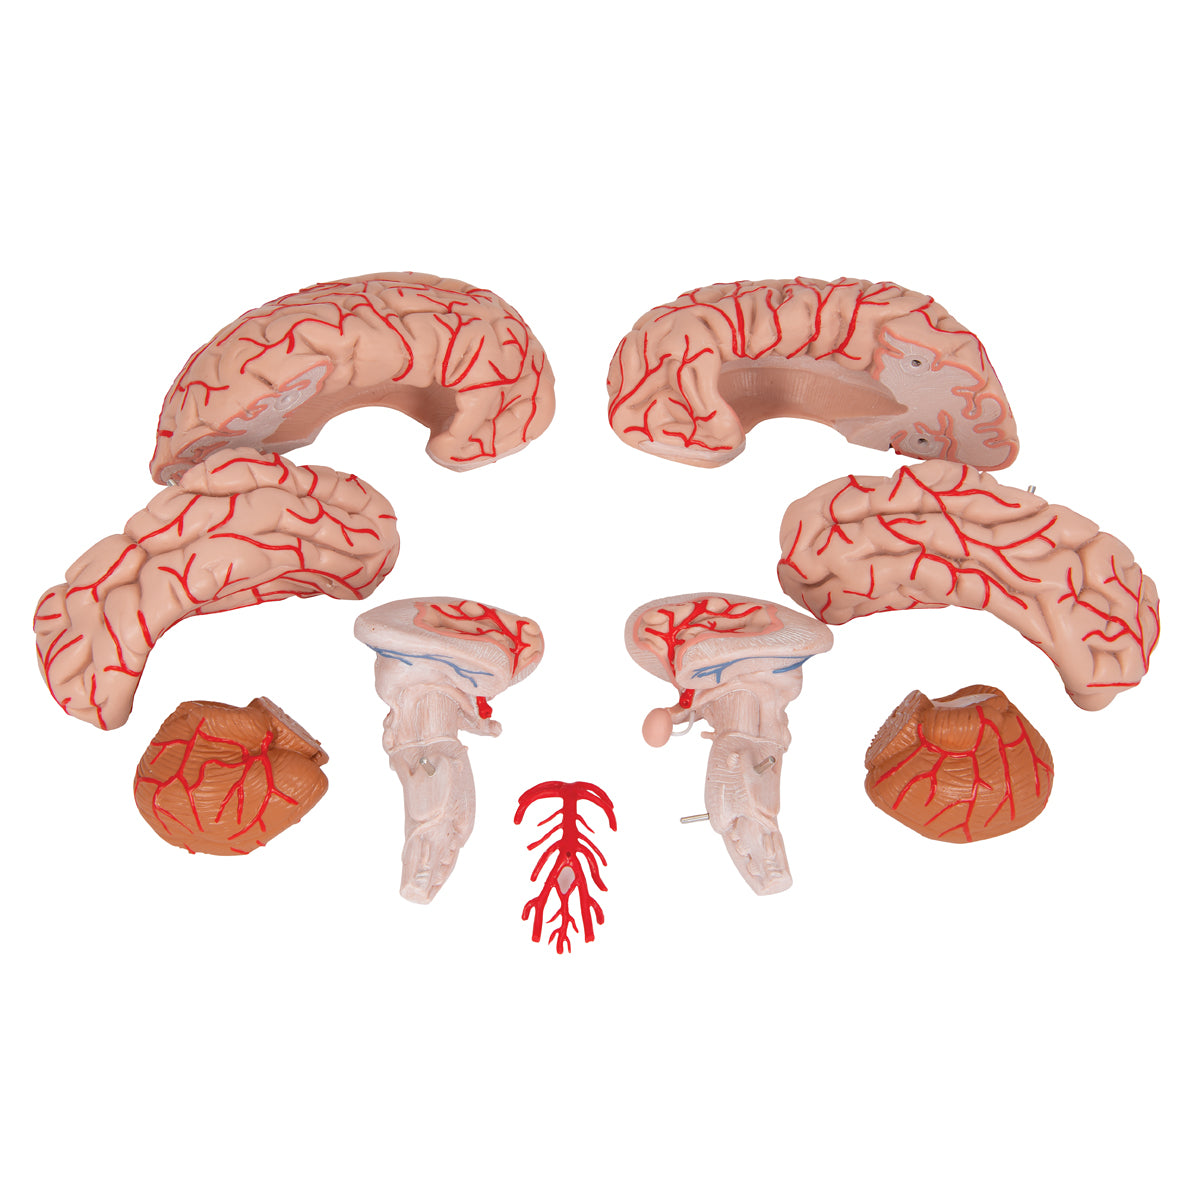 Brain model that also shows arteries. Can be separated into 9 parts